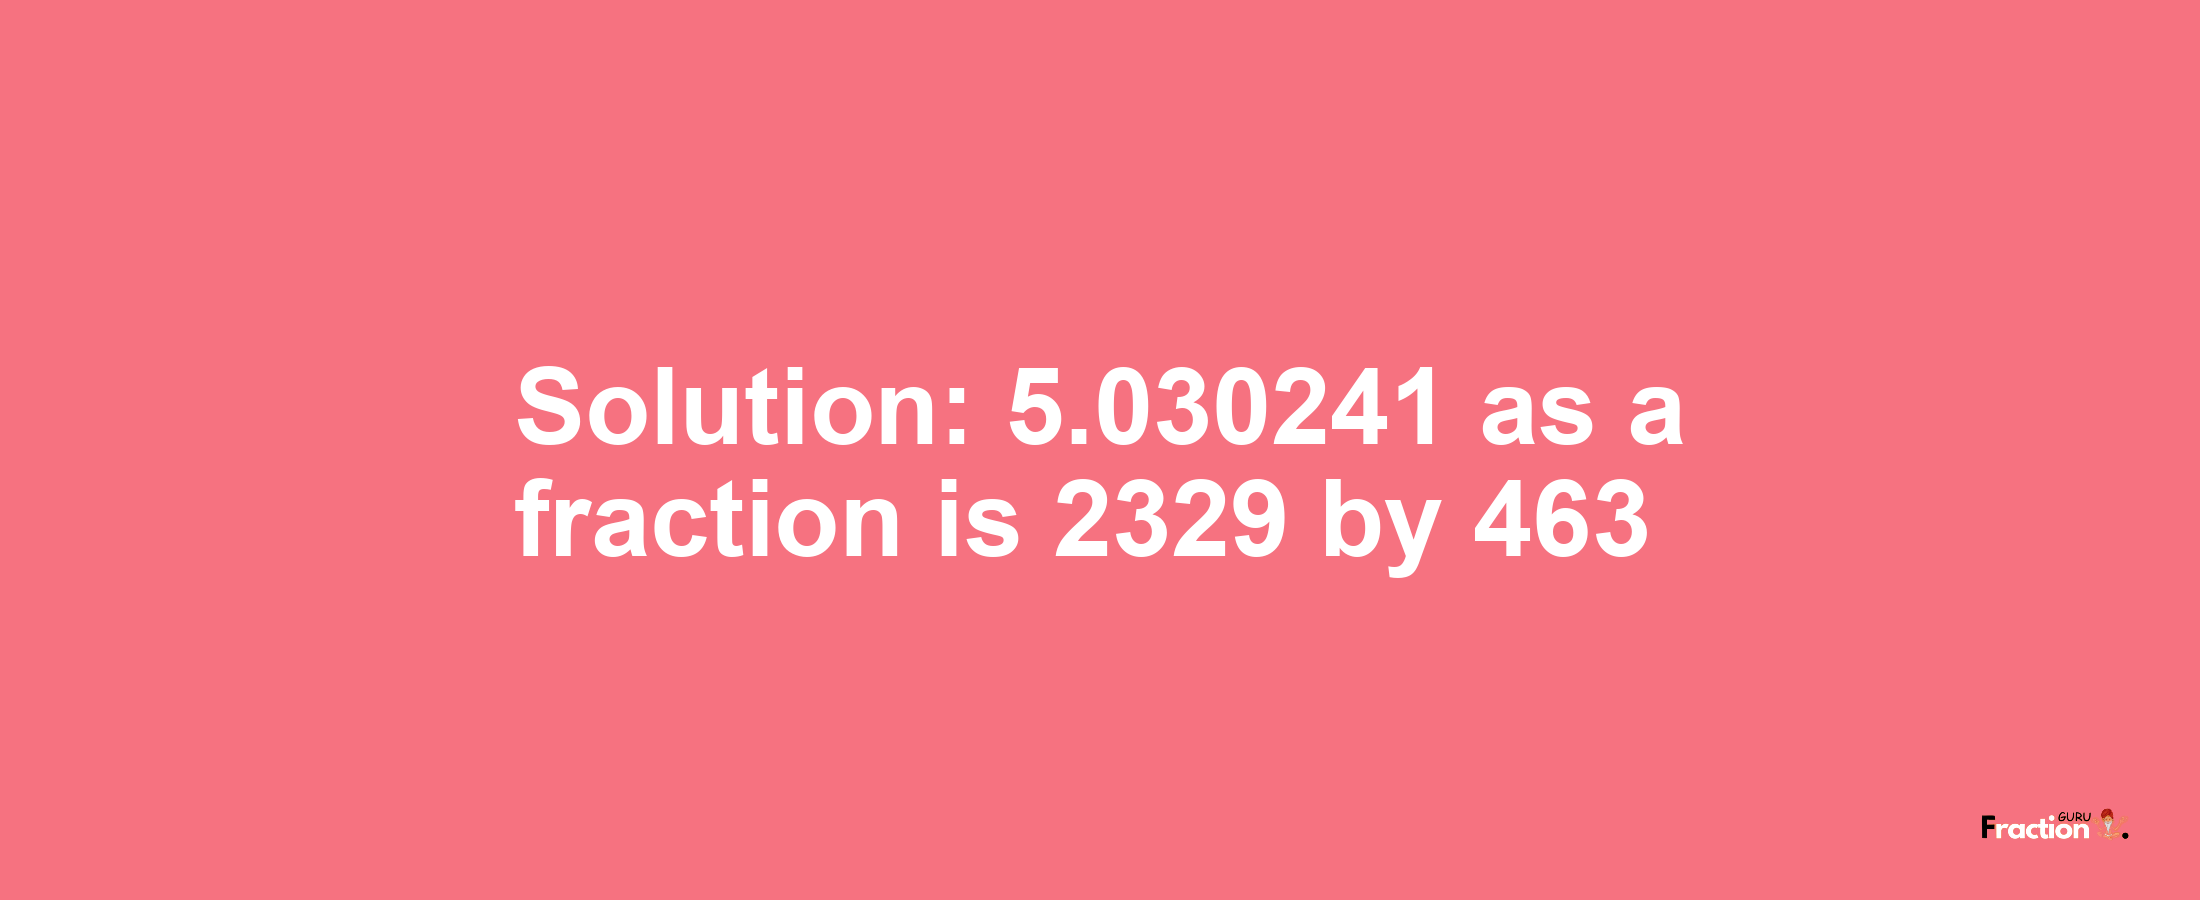 Solution:5.030241 as a fraction is 2329/463